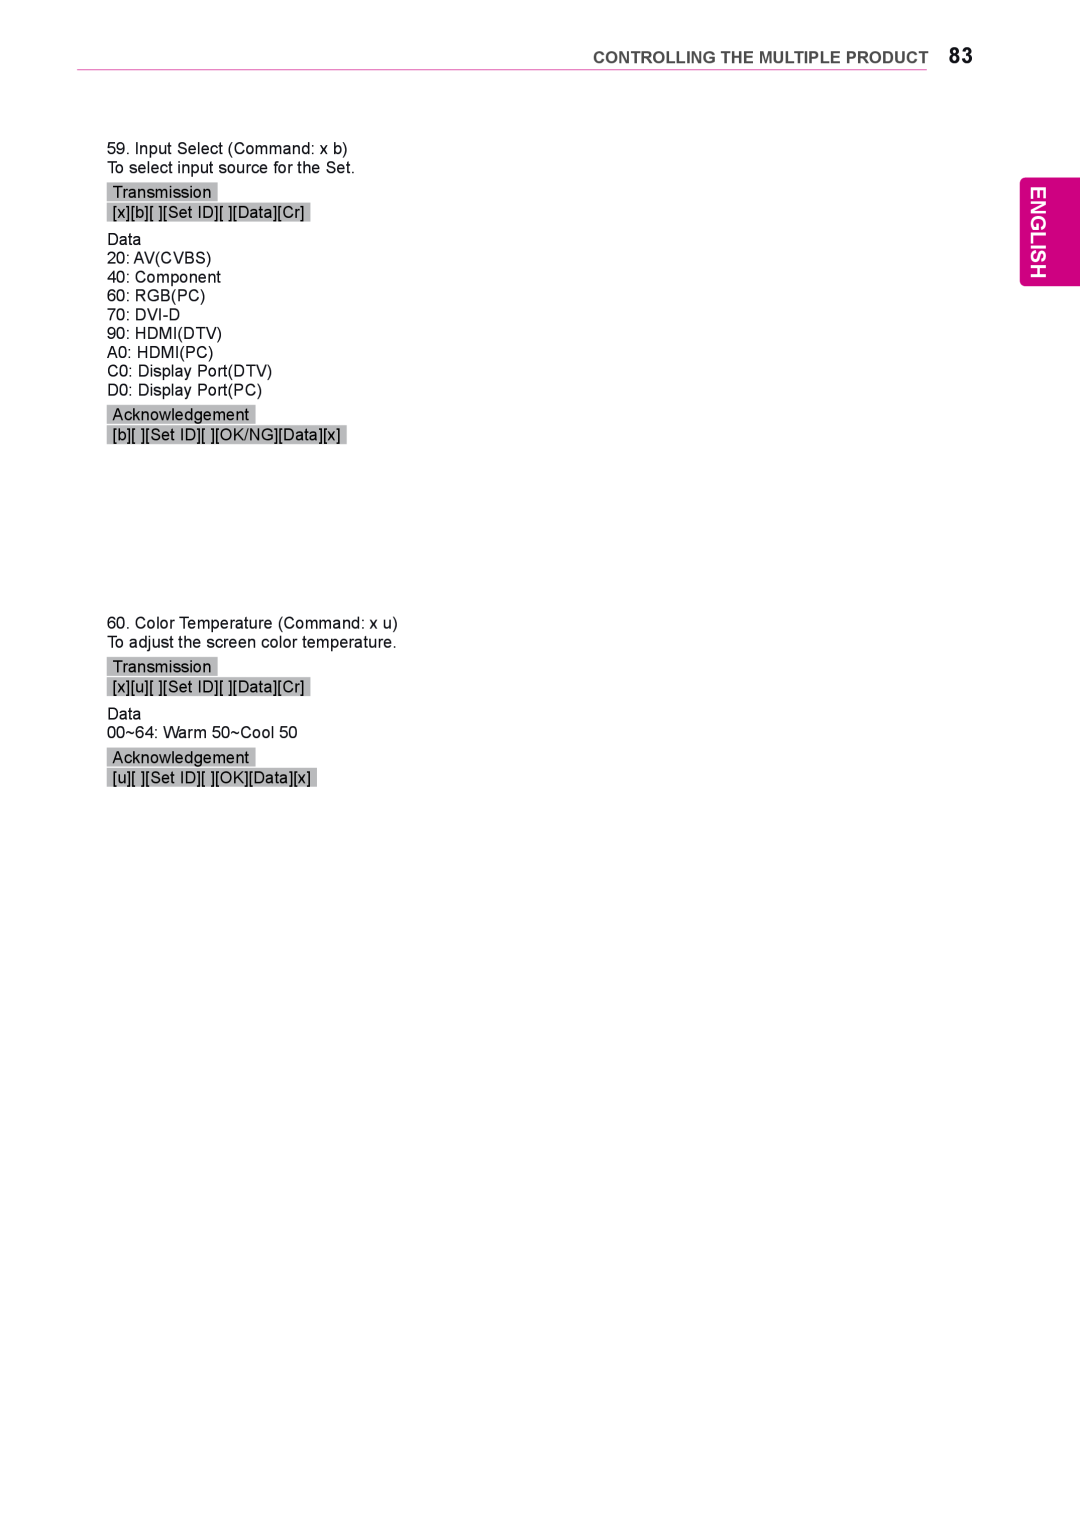 LG Electronics 55WS10, 42WS10, 47WS10 owner manual English, Controlling The Multiple Product 